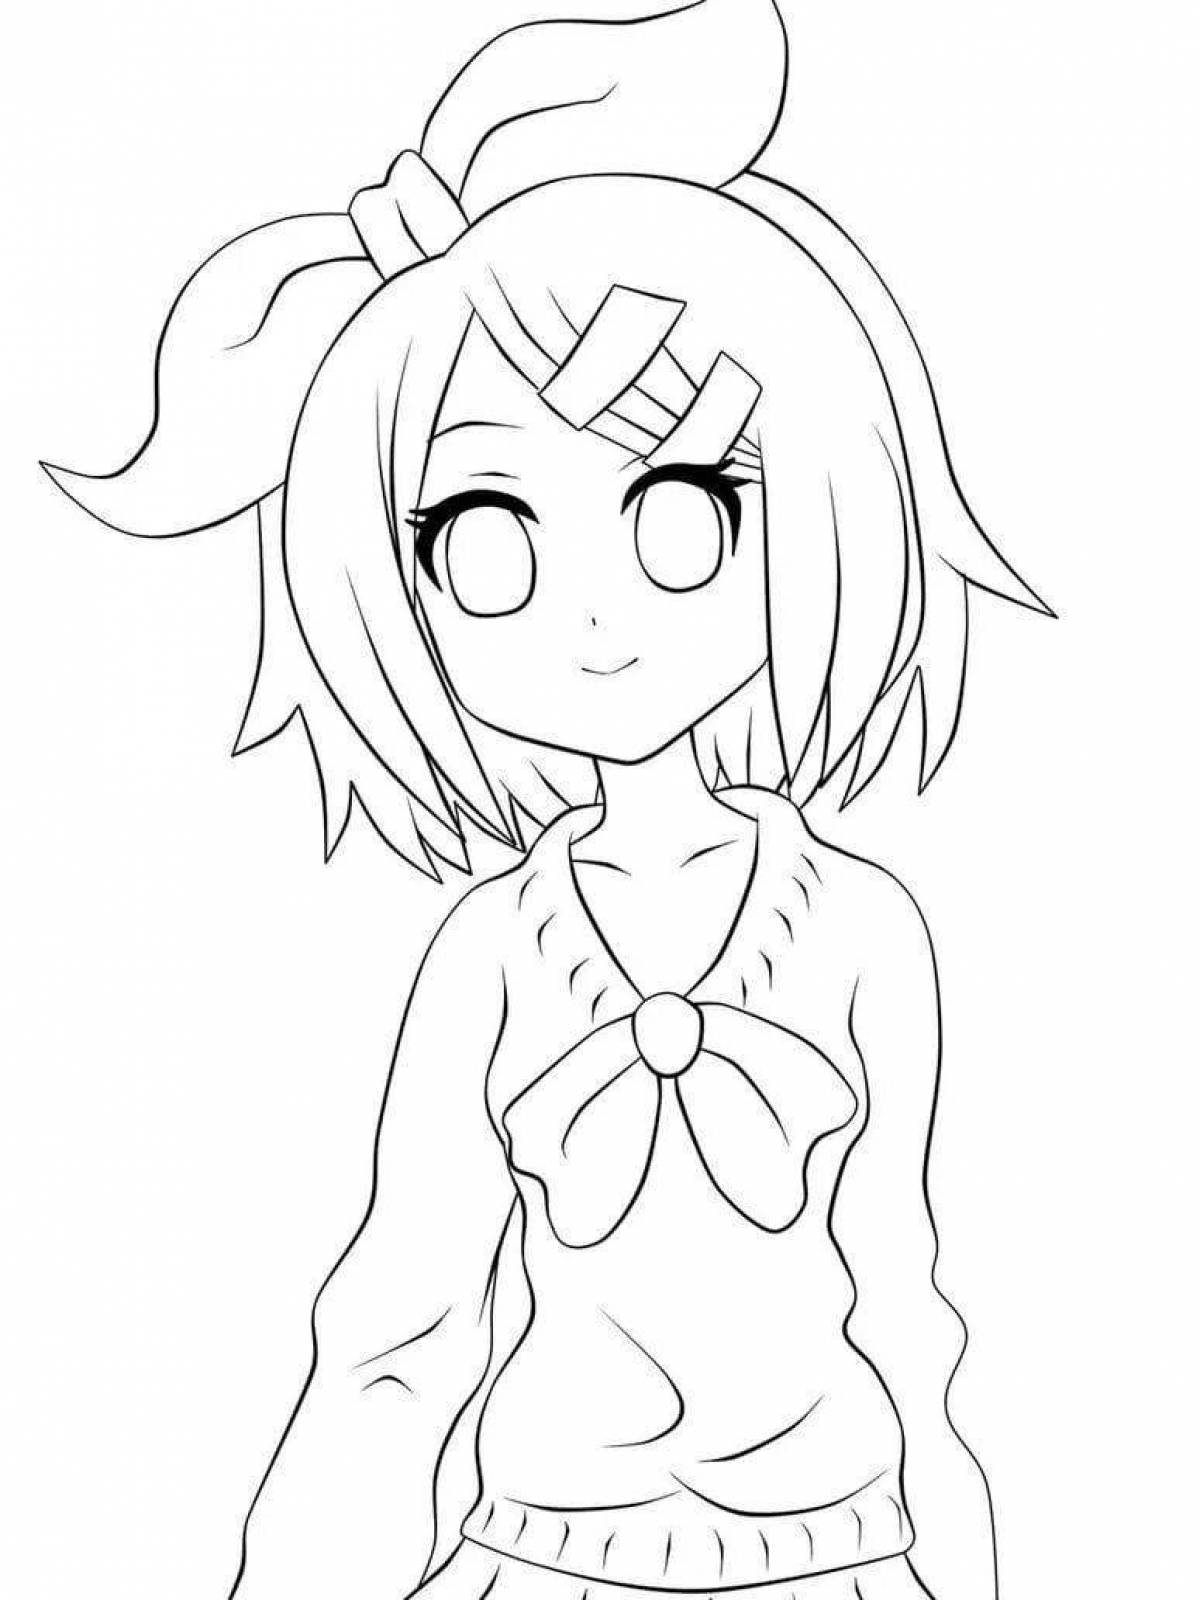 Playful vocaloid coloring page